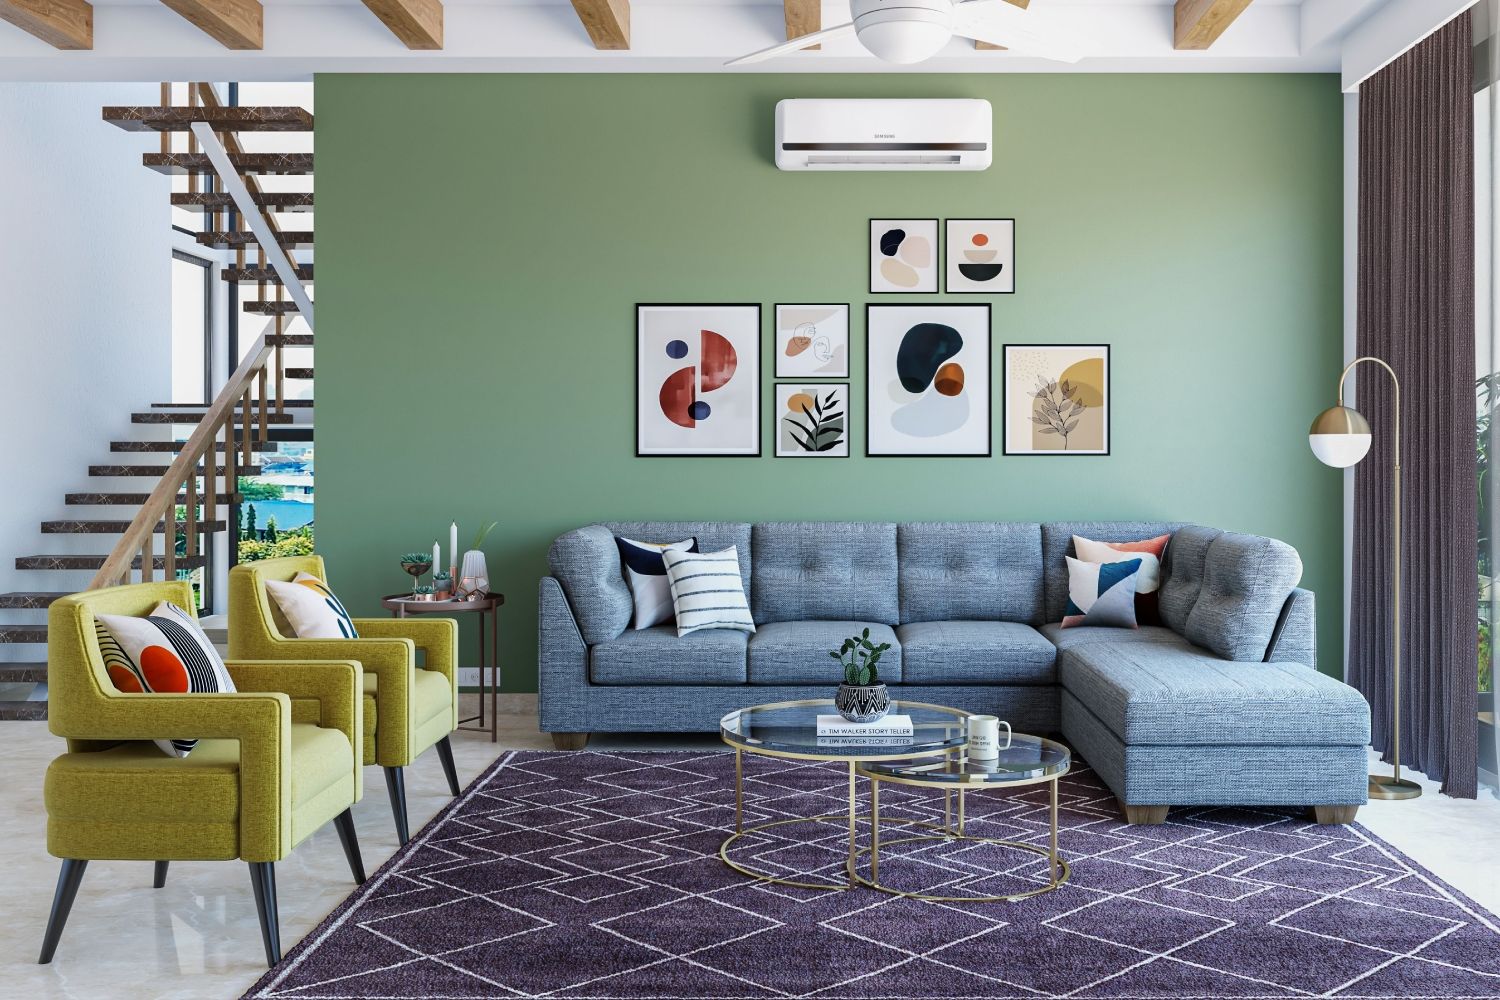 Modern Living Room Wall Paint Design In Green